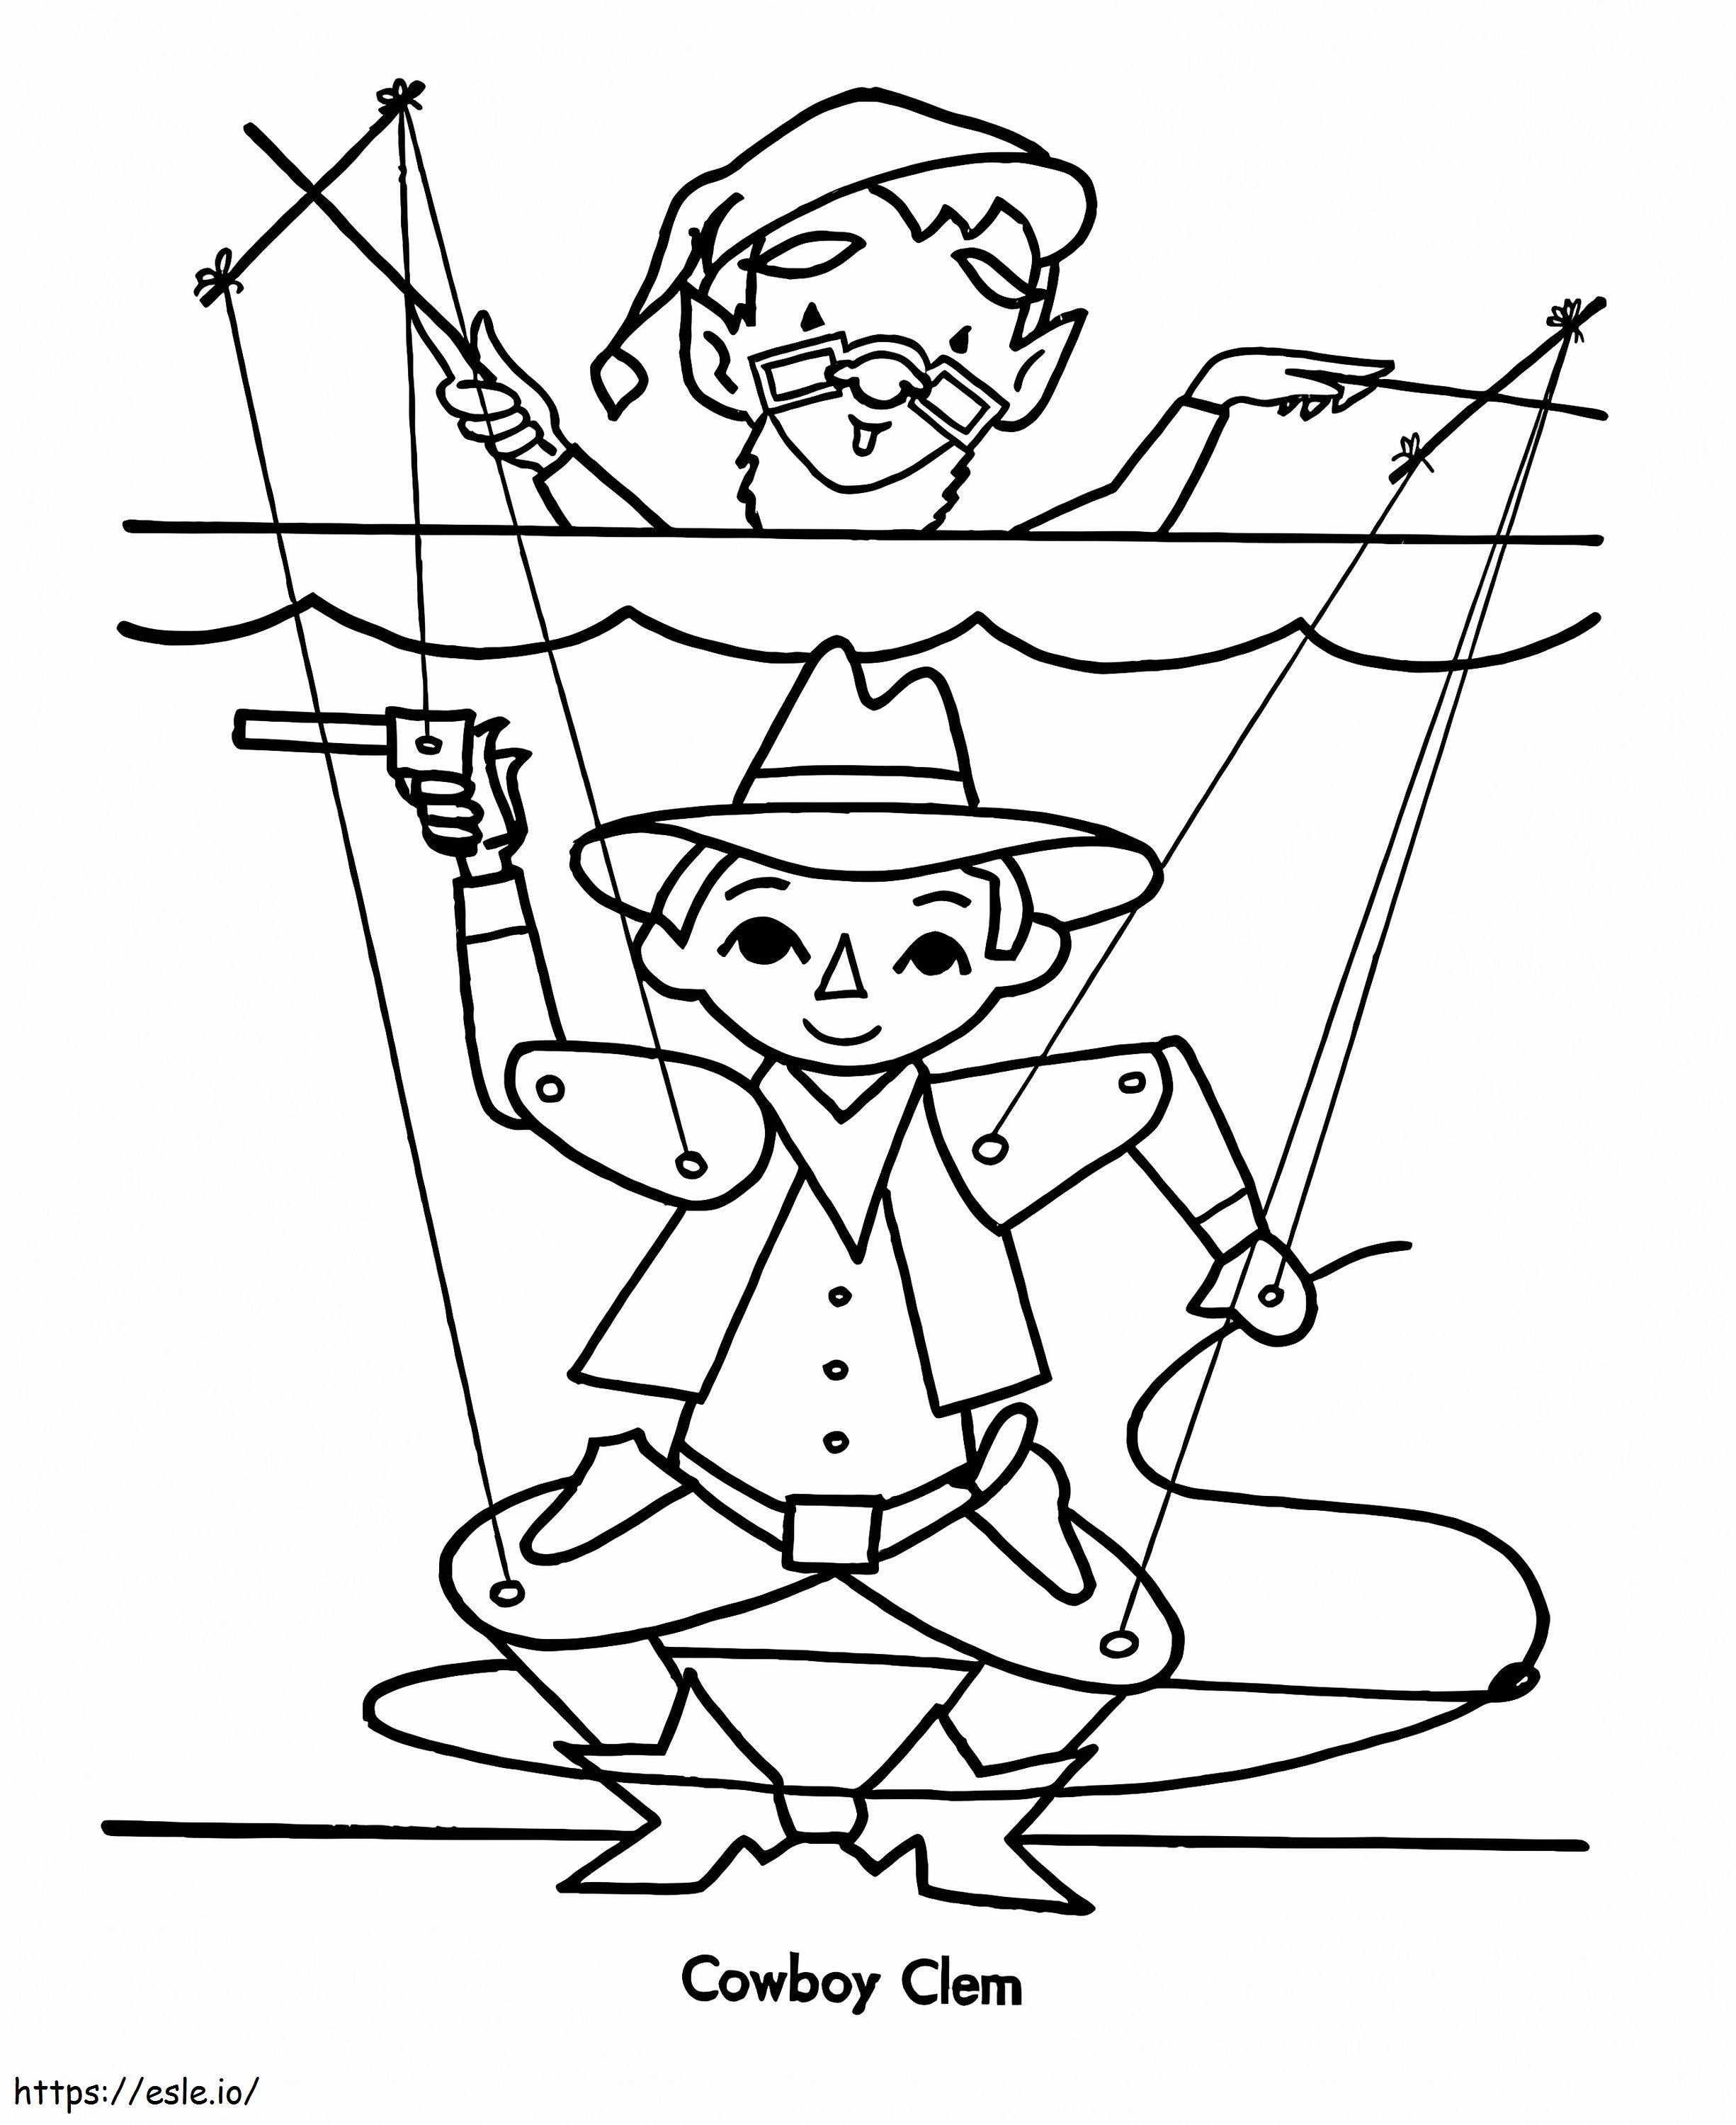 Cowboy String Puppet coloring page